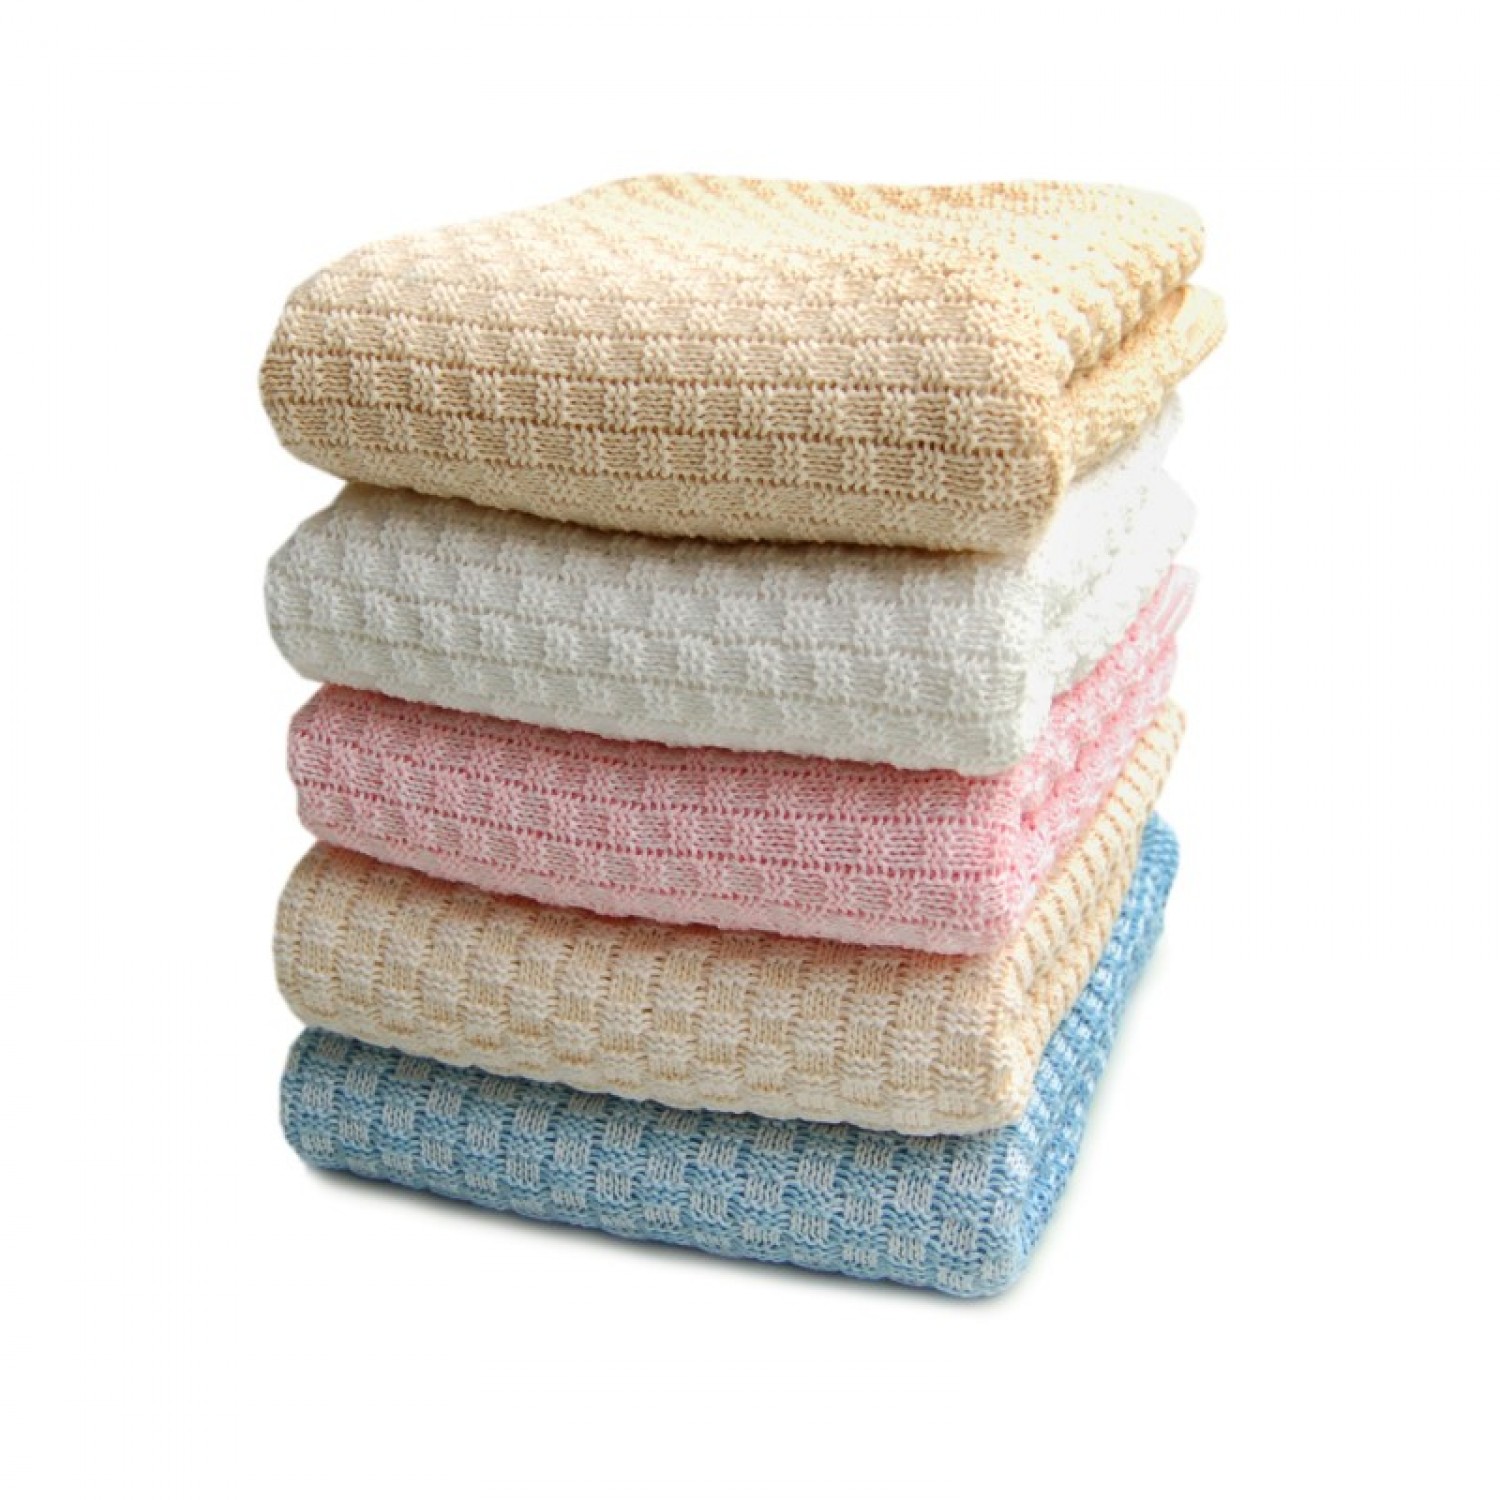 First Born Blanket of organic cotton, various colours